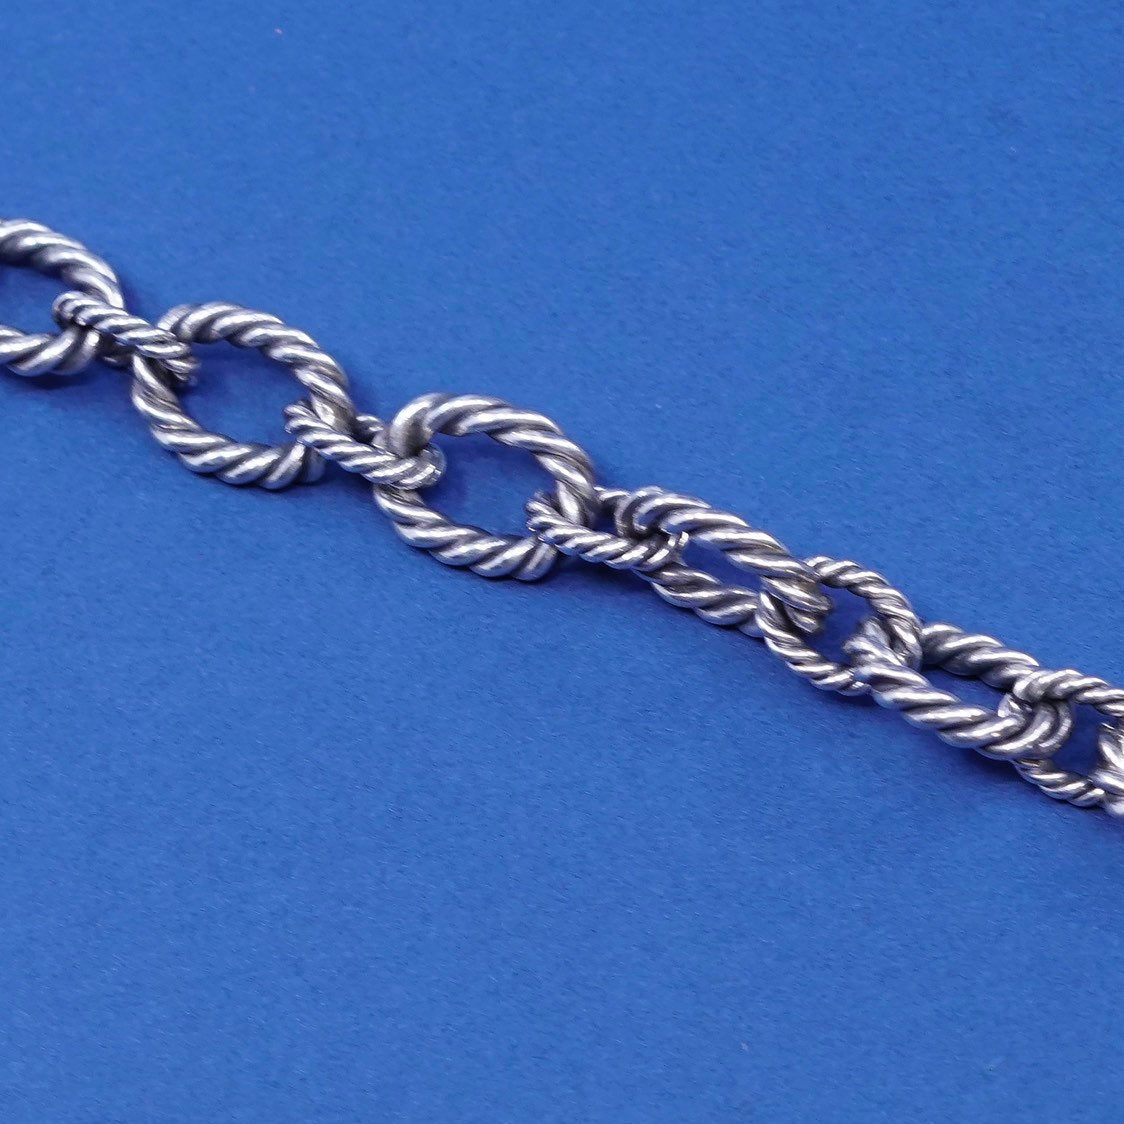 7”, 11mm, vtg Sterling silver handmade bracelet, 925 twisted cable circle chain